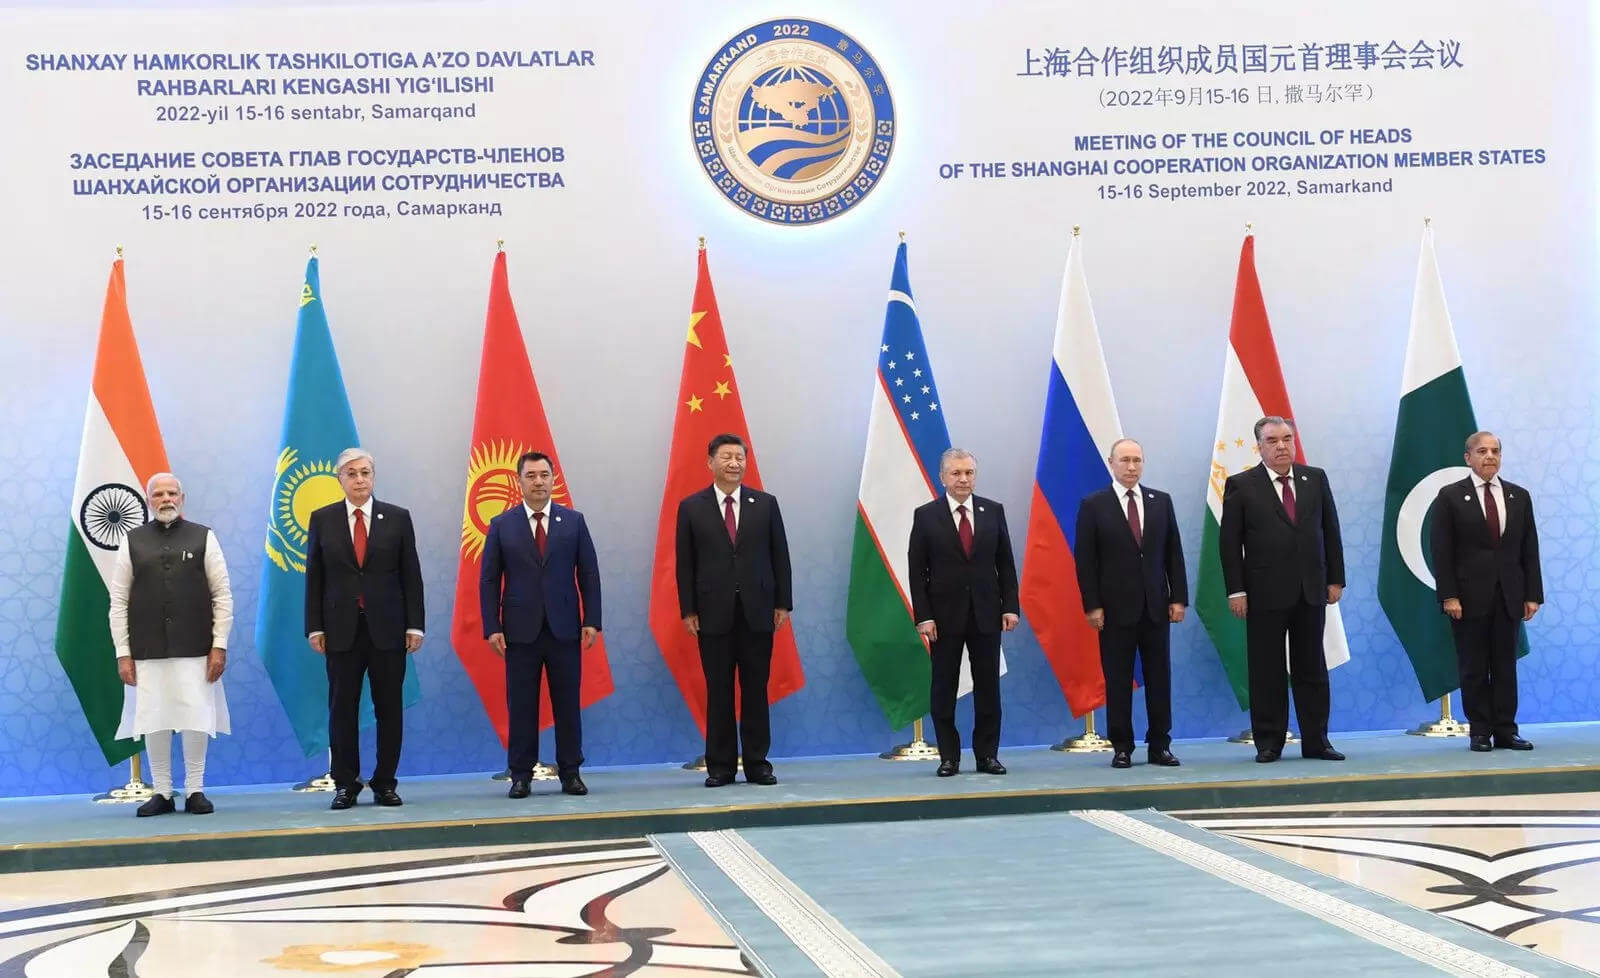 India to Host SCO Summit; Putin, Xi Jinping, Others to Attend Virtual Meeting Chaired by PM Modi